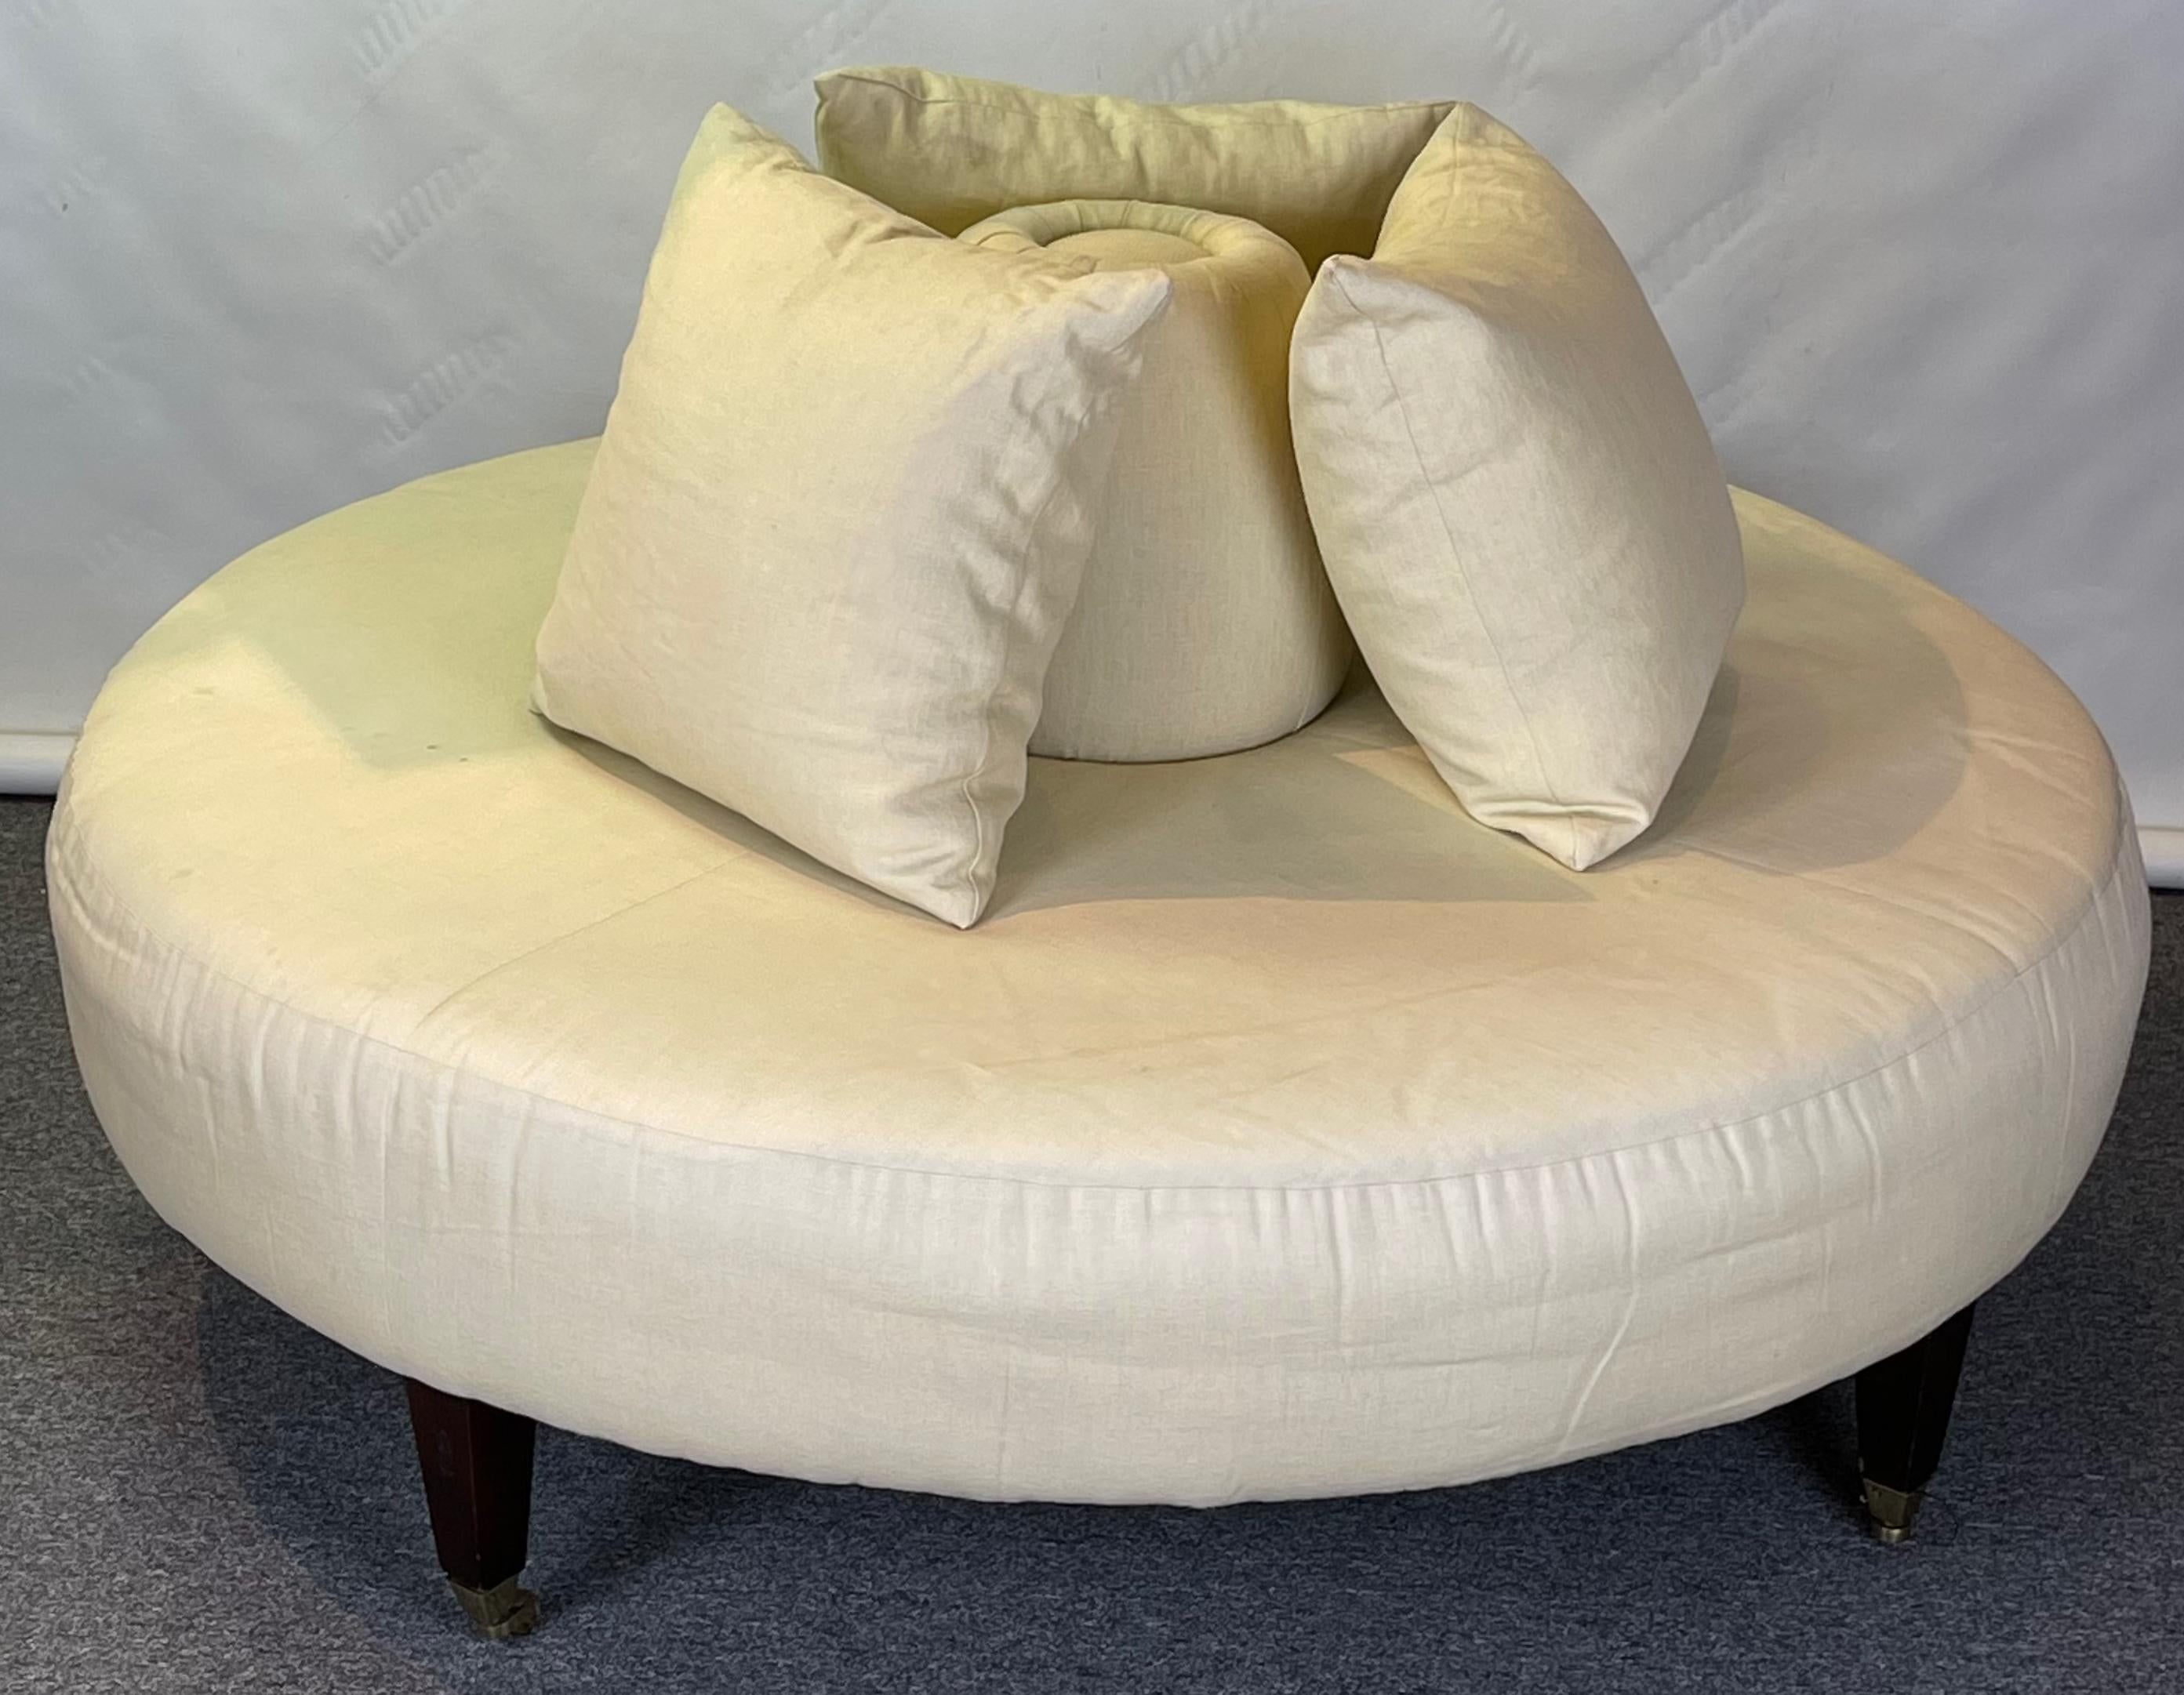 A custom upholstered circular confidante or round bench upholstered in off white linen resting on four square tapering legs with brass cup casters.